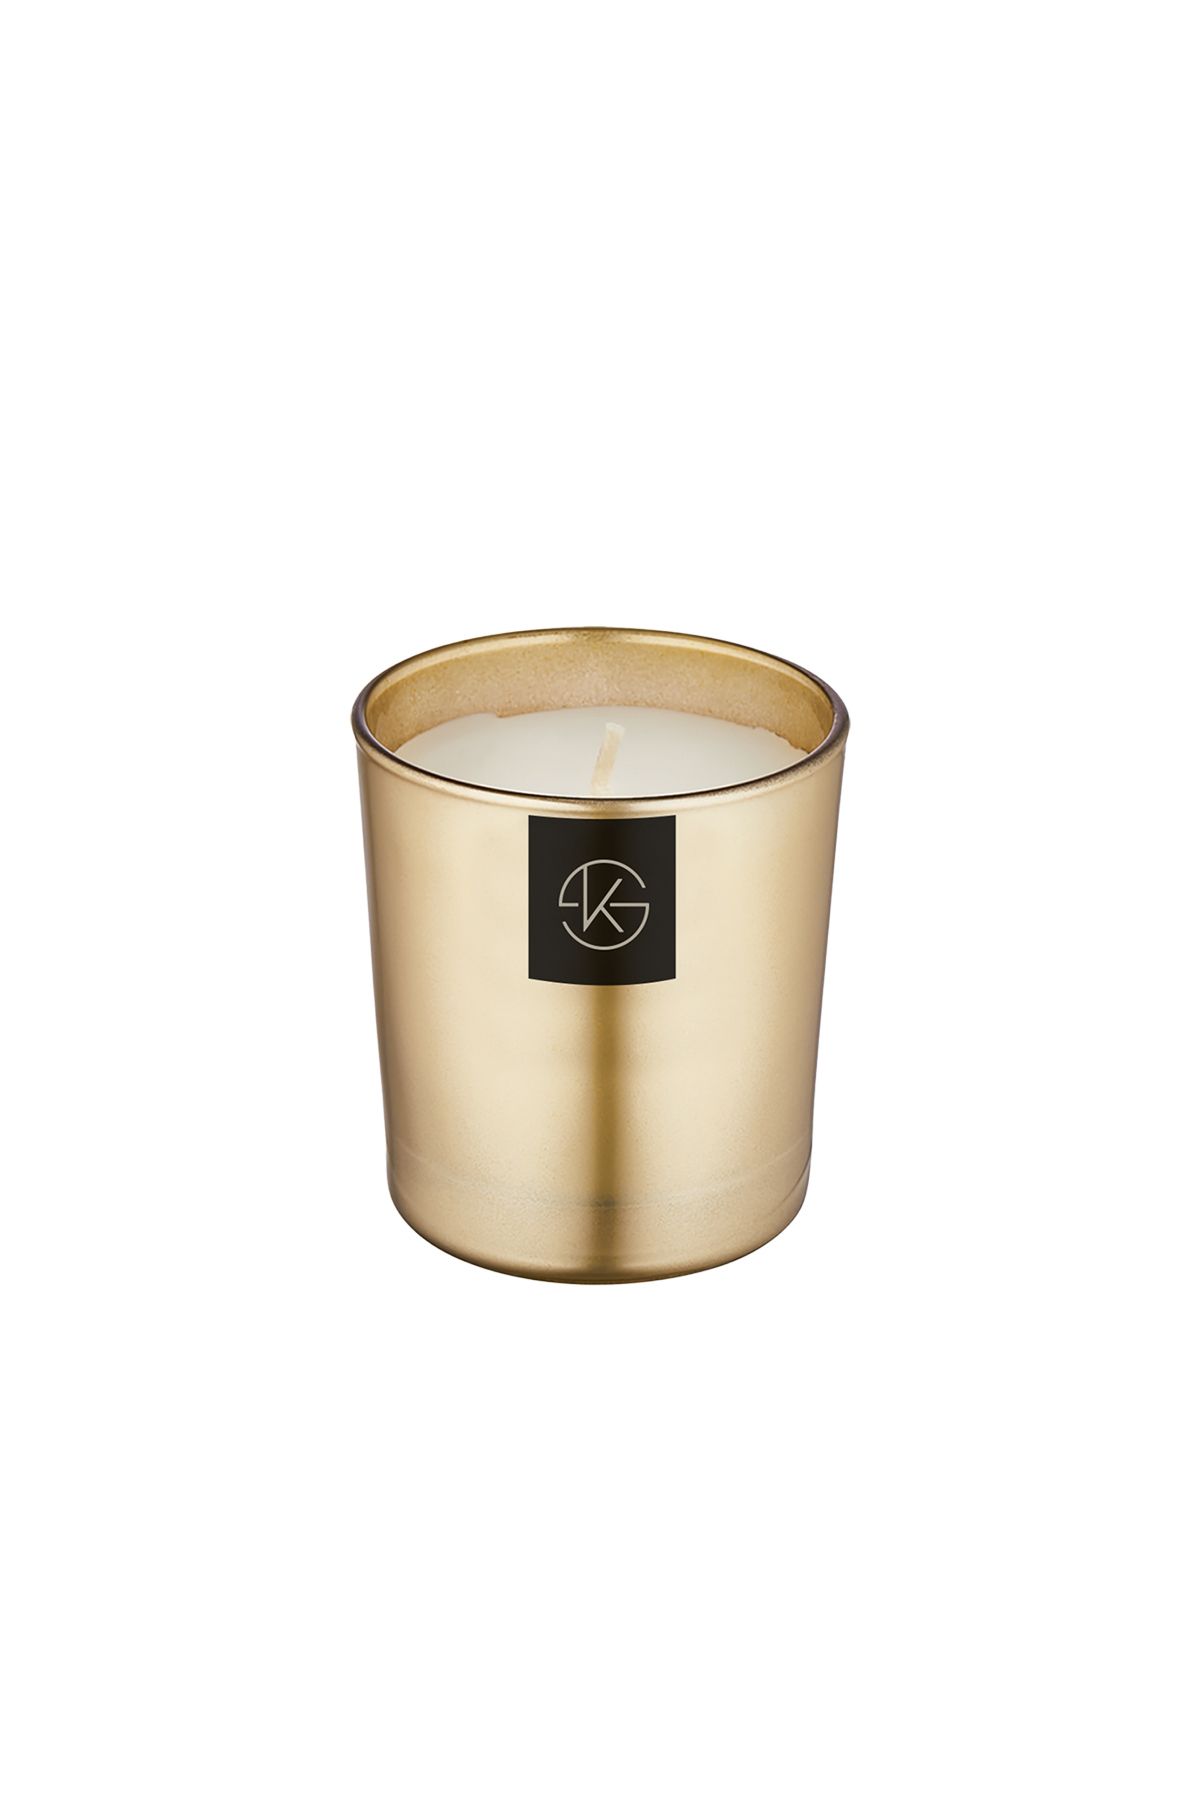 SELKA HOME Miracle Gold Cam Metalic Candle Mum